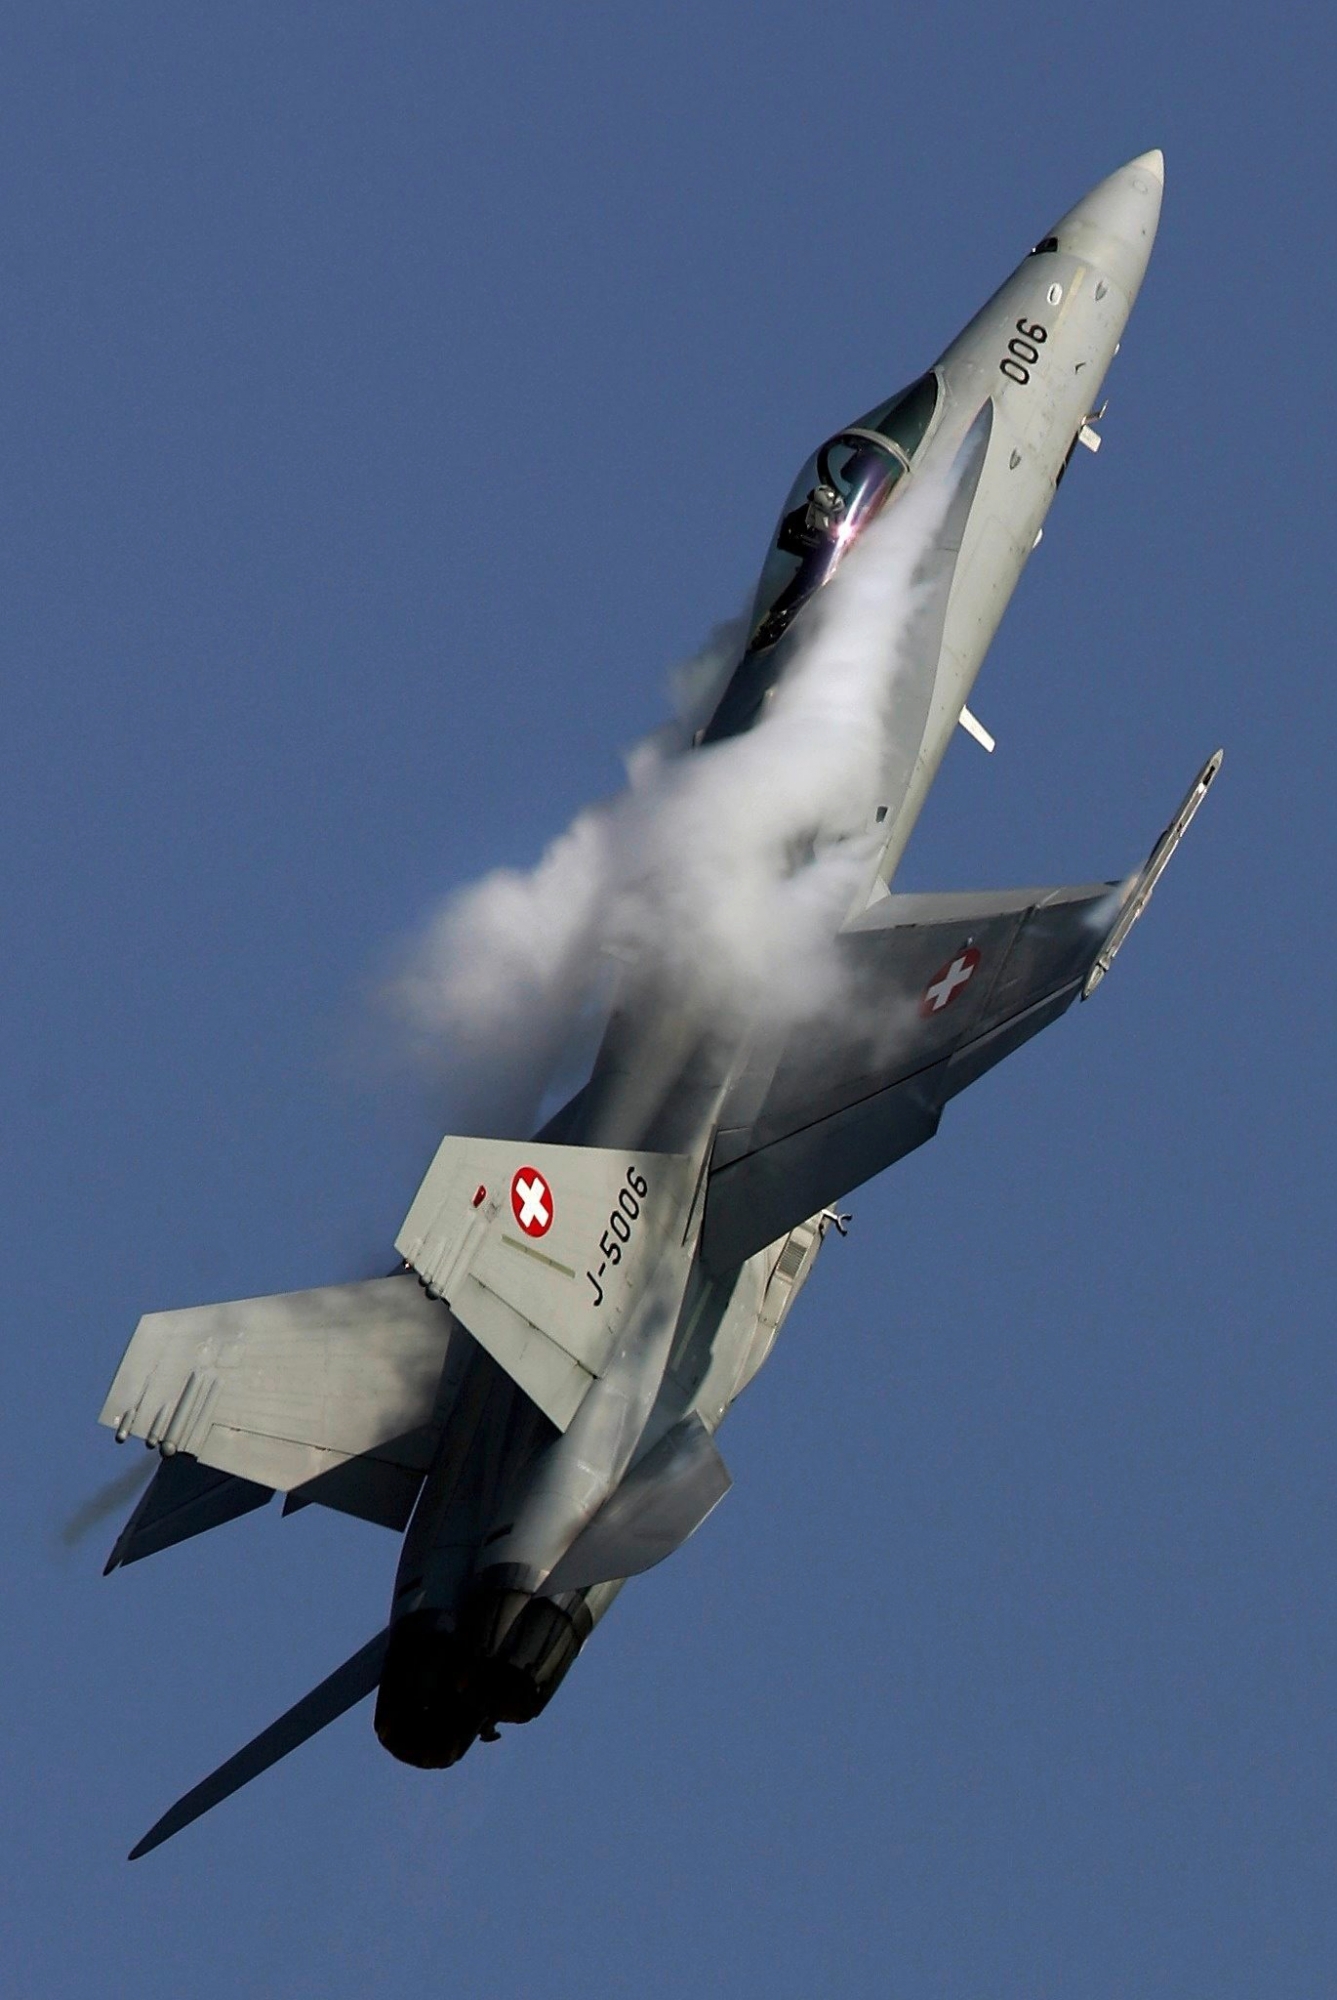 A F/A 18 jet of the Swiss Air Forces shows vaporisation effect due to the speed, during a demonstration flight at the airshow Air 04 in Payerne, September 5, 2004. The airshow is one of the biggest in Europe this year, showing top international and national flying teams. Swiss Air Force takes the opportunity to celebrate the 90th anniversary of the founding of the Swiss Air Force and the 40th anniversary of their acrobatic jet team Patrouille Suisse.  (KEYSTONE/Fabrice Coffrini) SWITZERLAND AIR SHOW